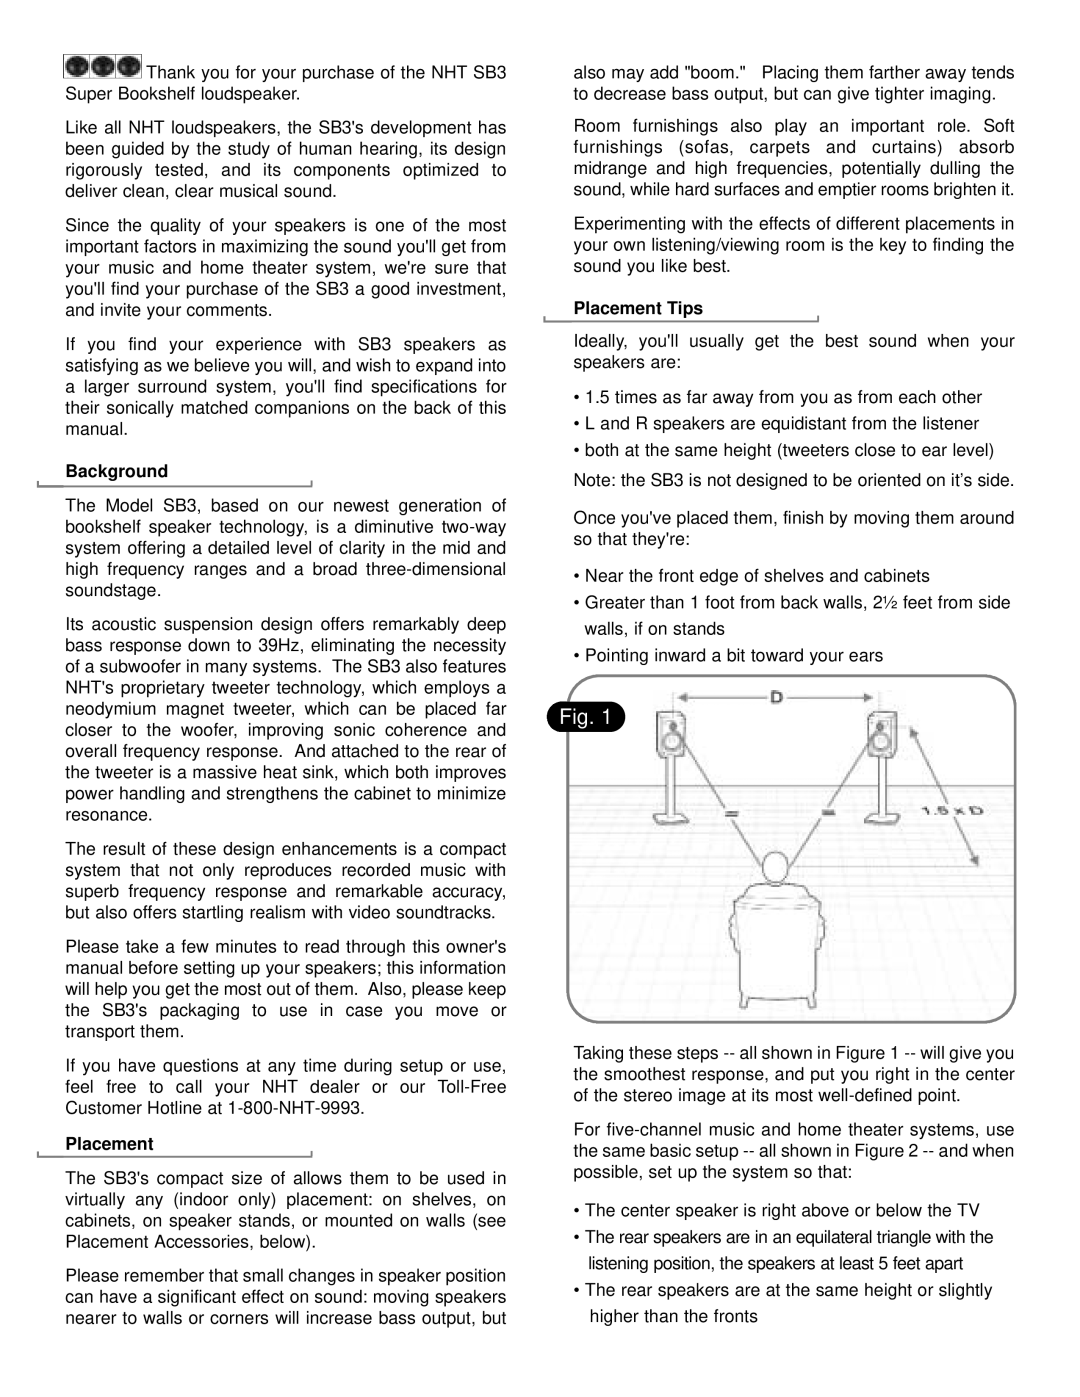 NHT SB3 user manual Background, Placement Tips 